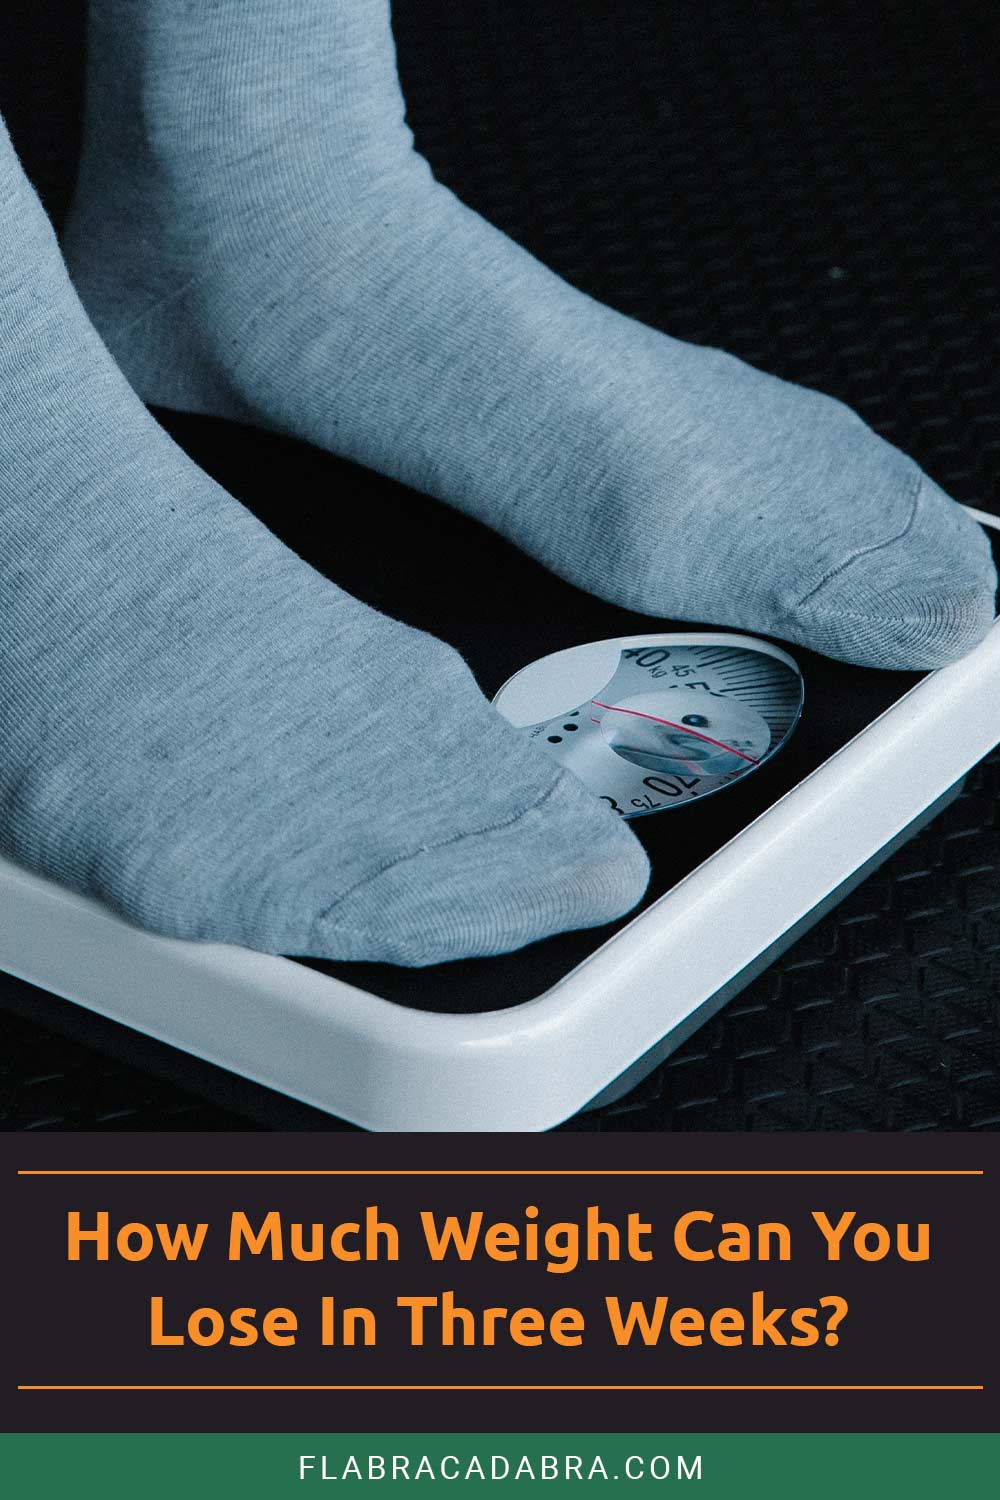 Feet in socks on a weighing machine - How Much Weight Can You Lose In Three Weeks?